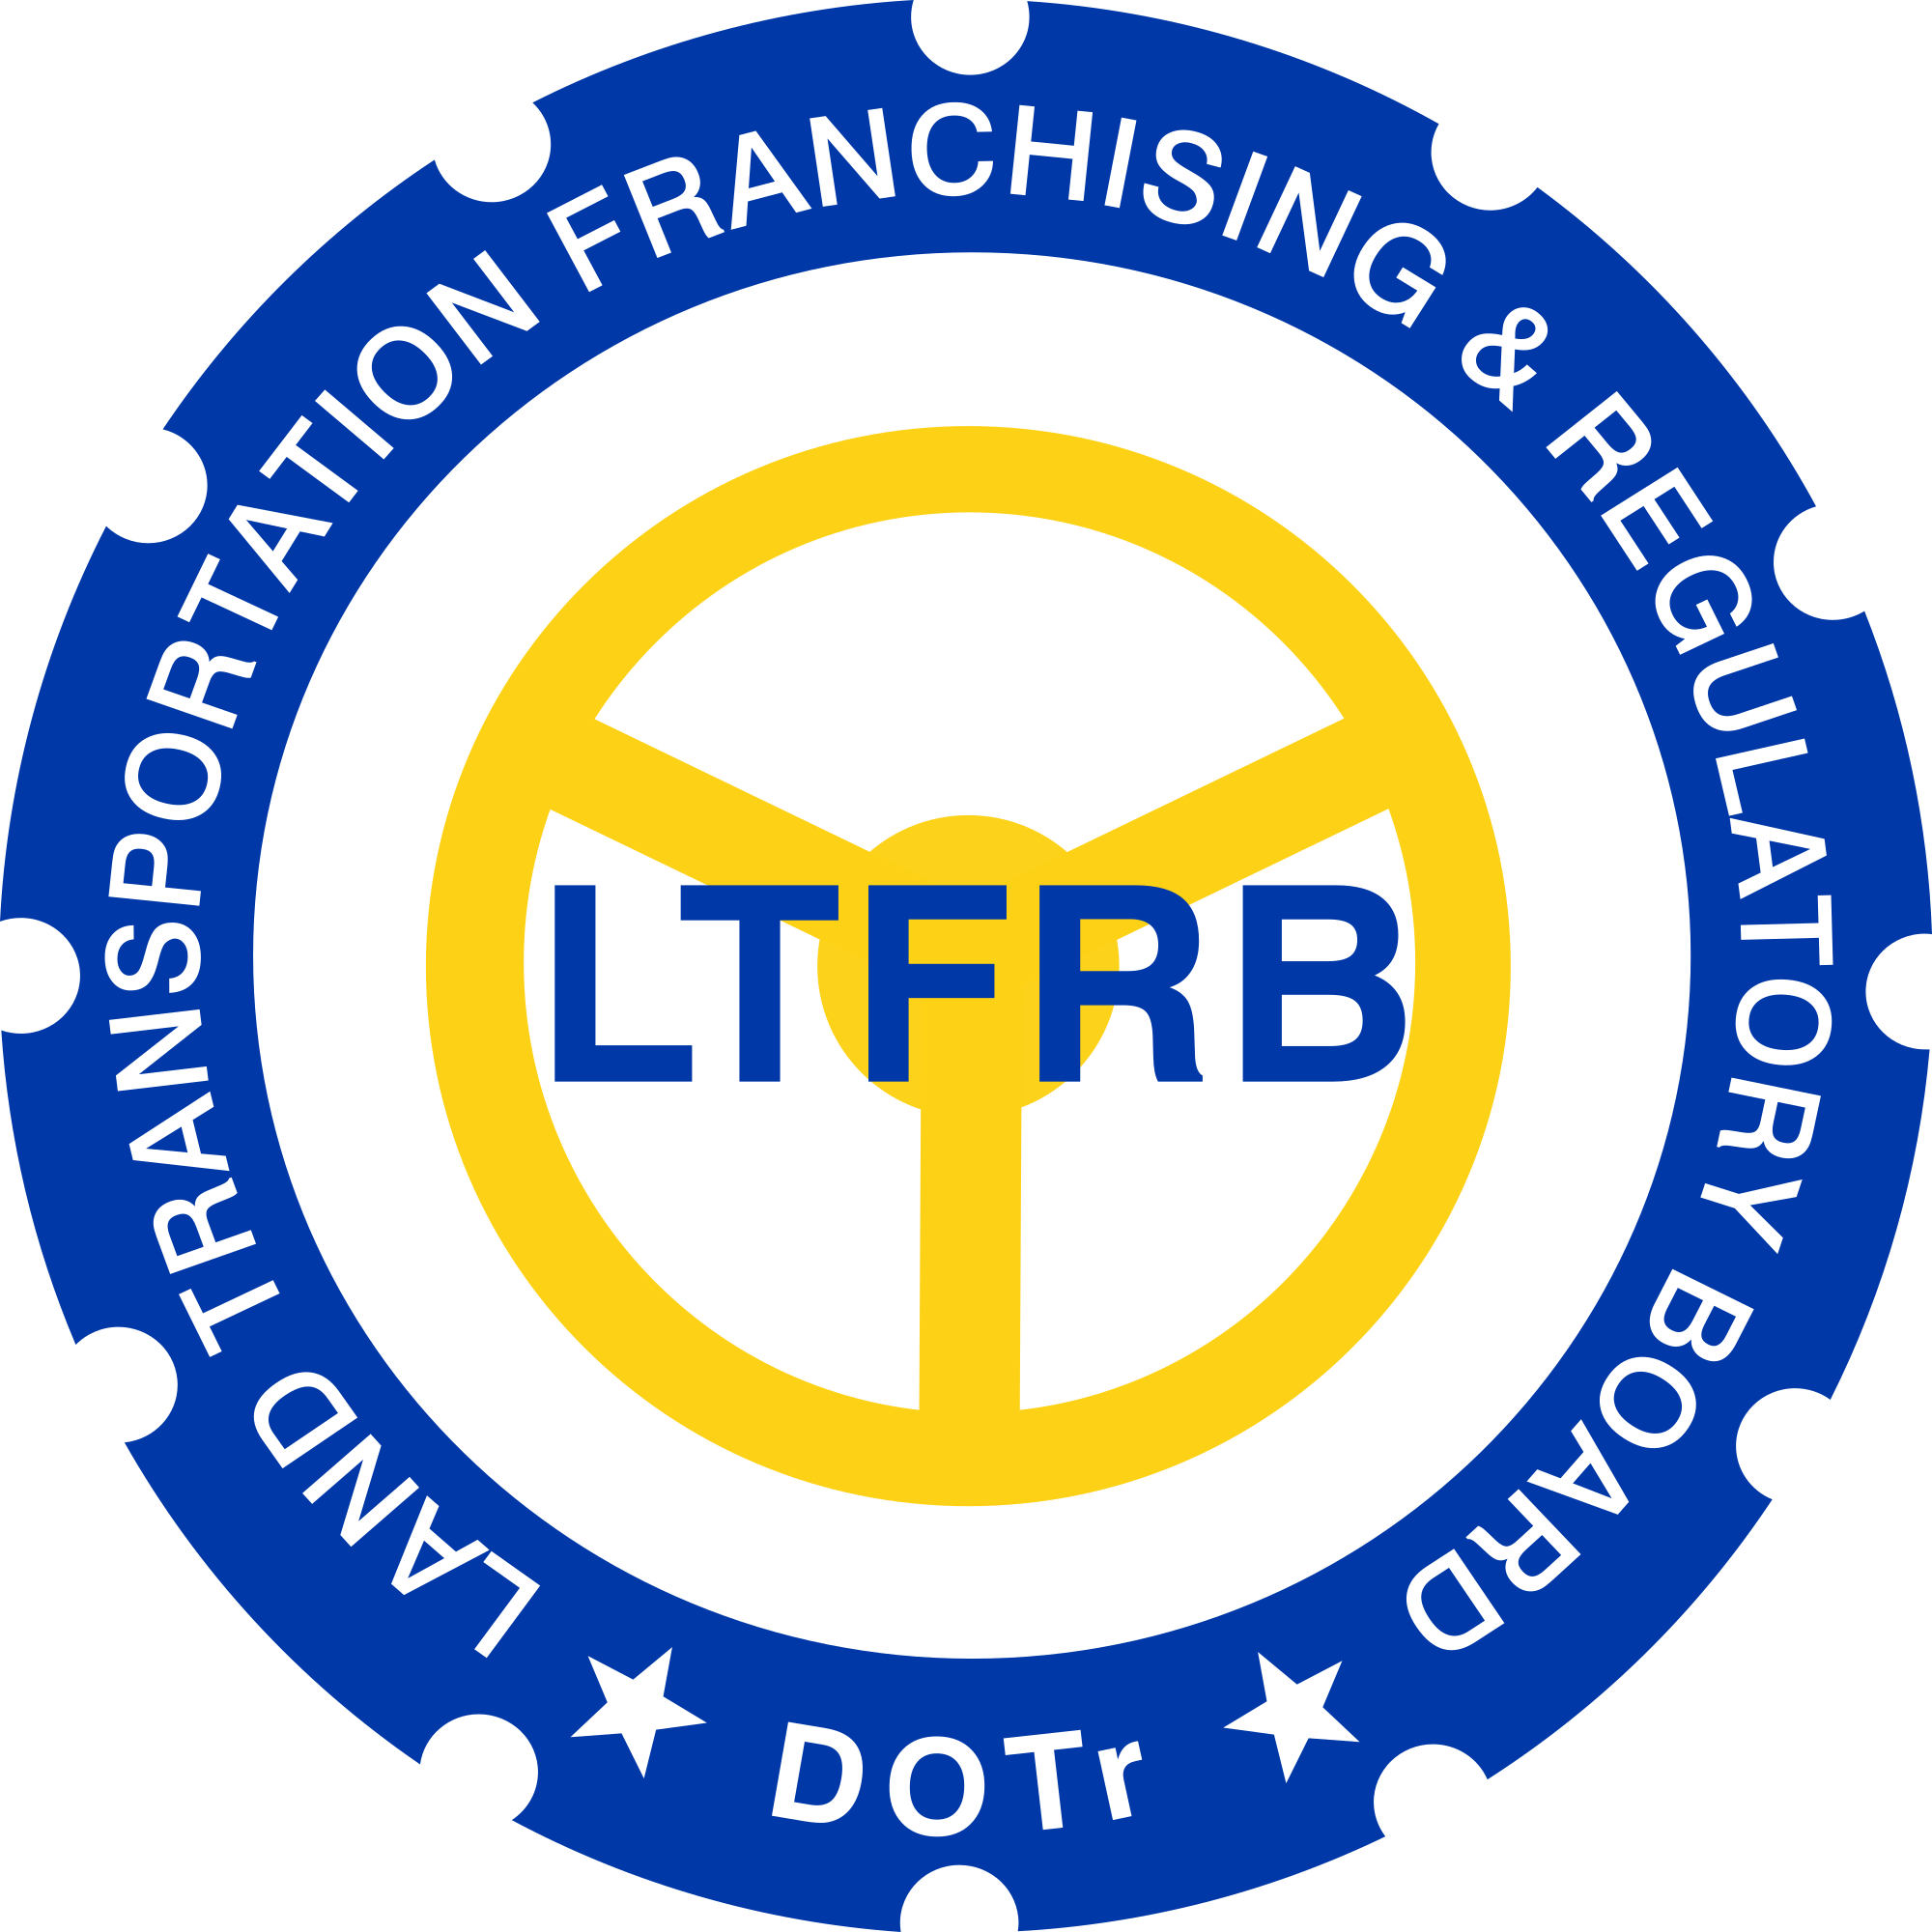 Land transportation franchising and. Rules clipart government regulation